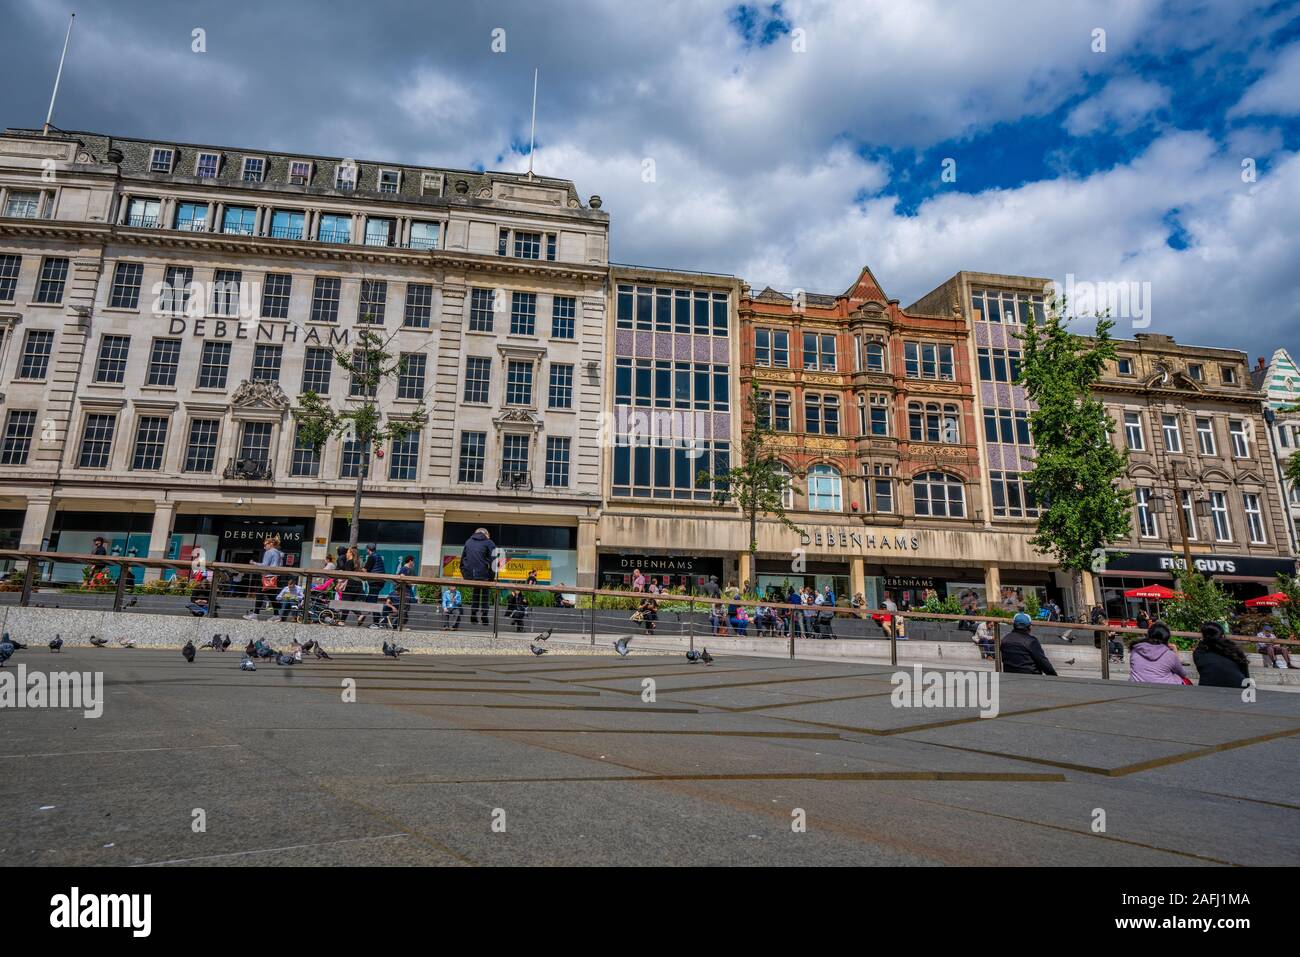 NOTTINGHAM, UNITED KINGDOM - AUGUST 15: This is a view of city buildings and shops at the Old Market Square, a popular travel destintion on August 15, Stock Photo